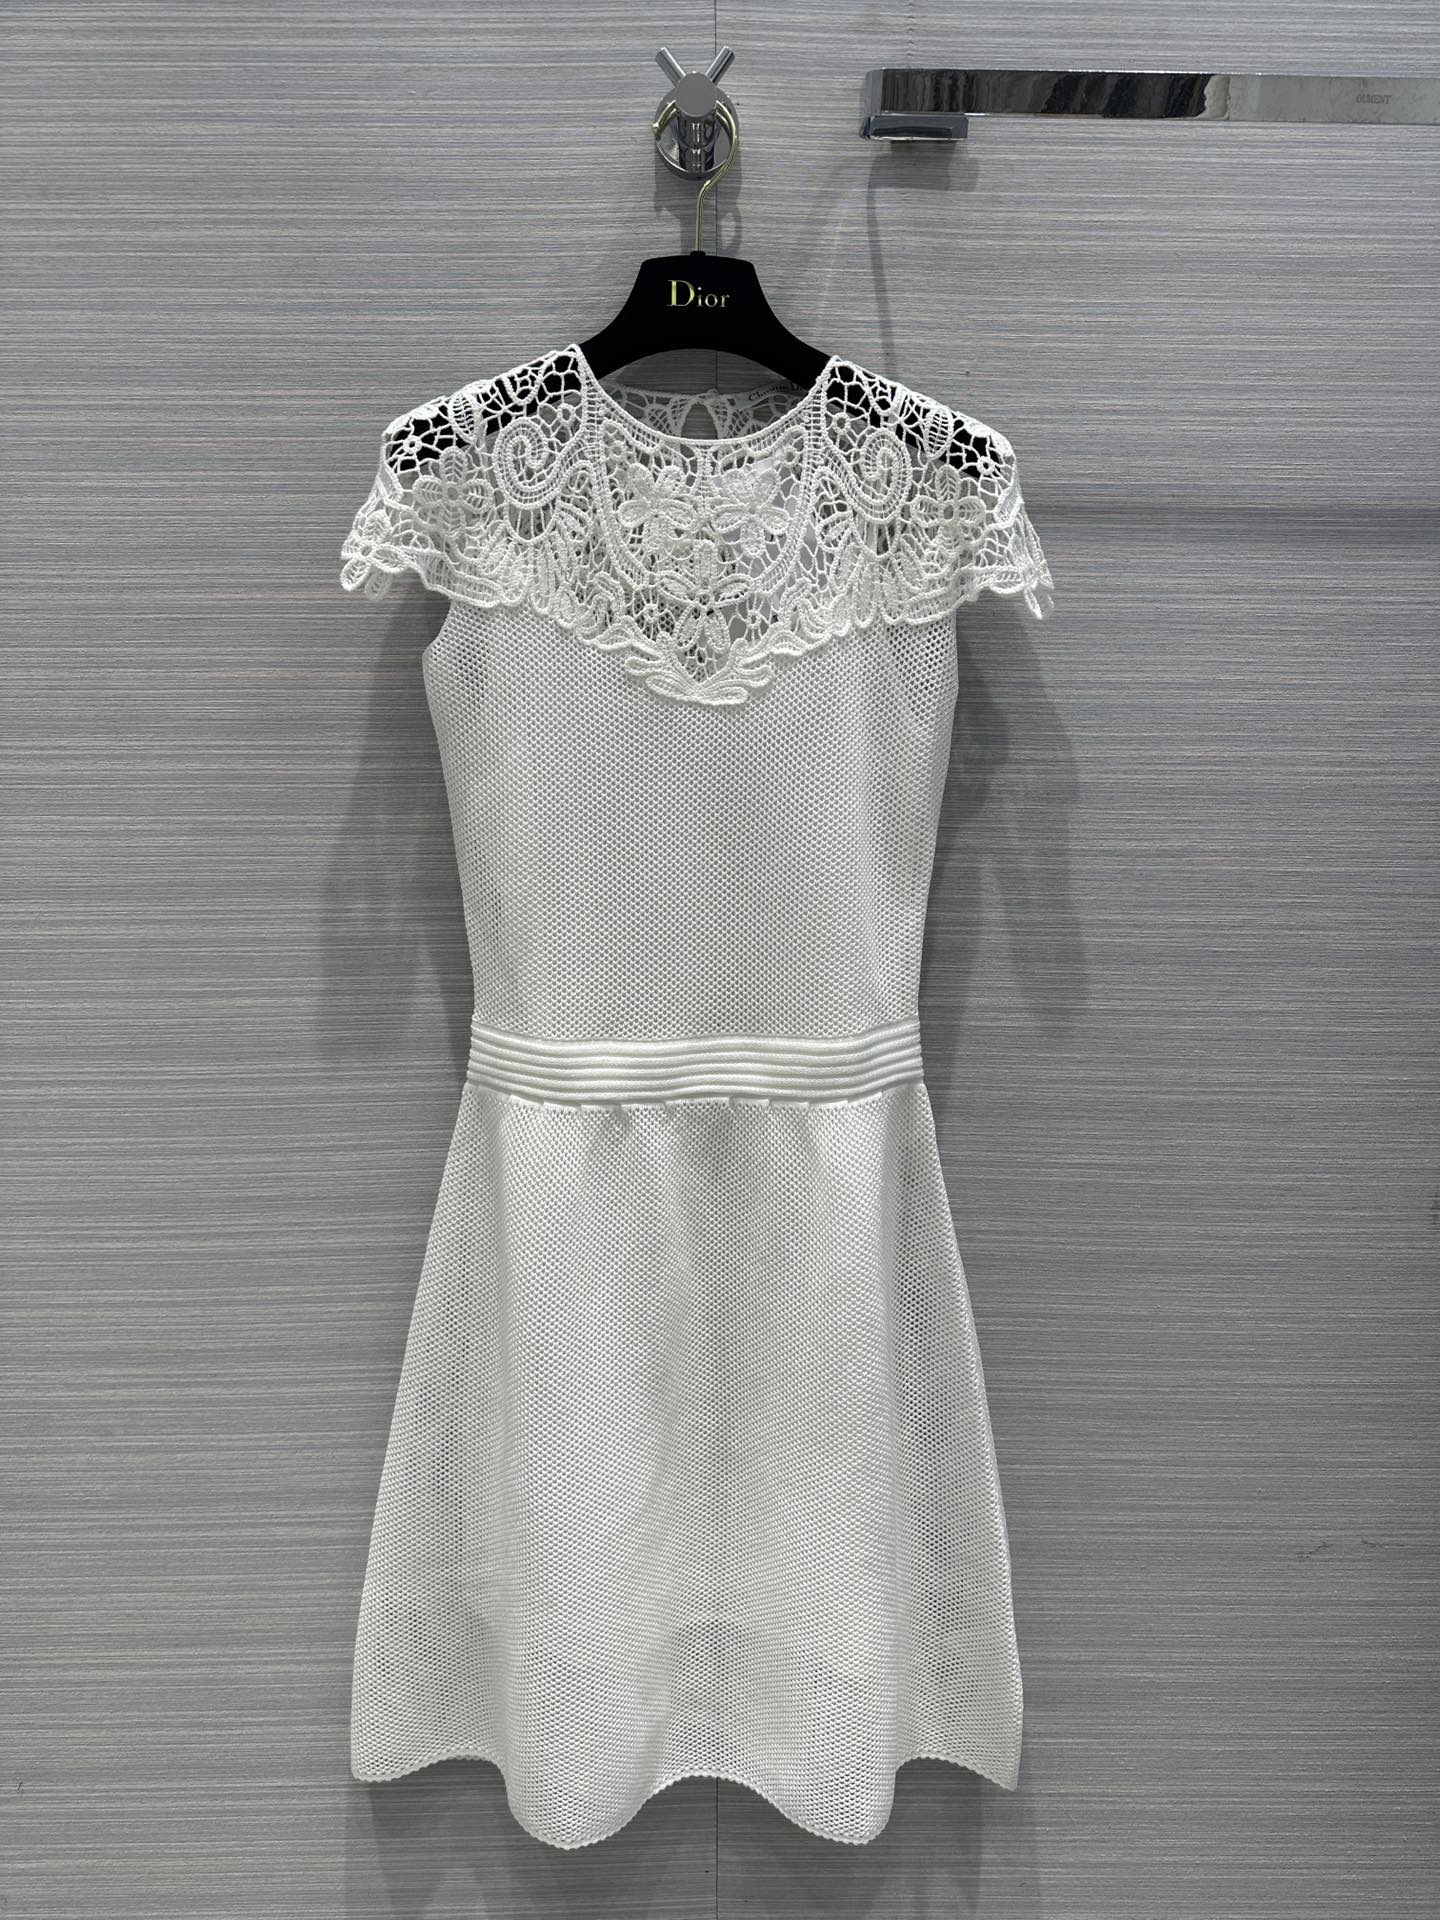 Best Like
 Dior Clothing Dresses White Embroidery Cotton Knitting Spring/Summer Collection